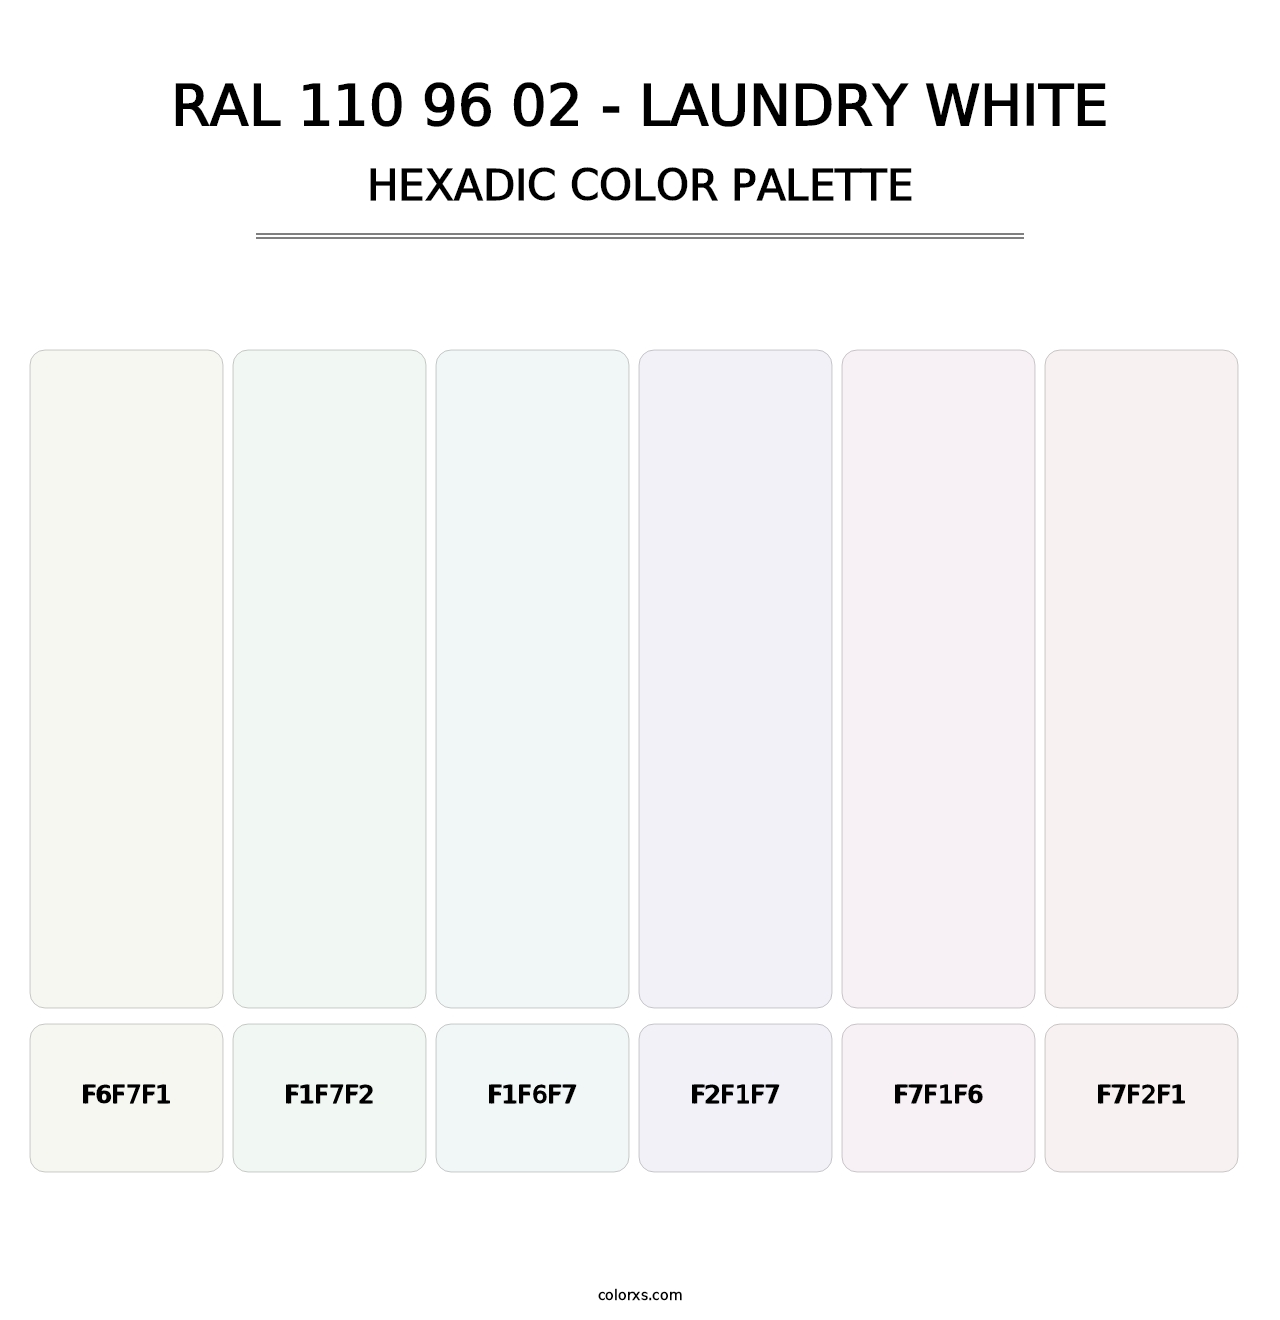 RAL 110 96 02 - Laundry White - Hexadic Color Palette